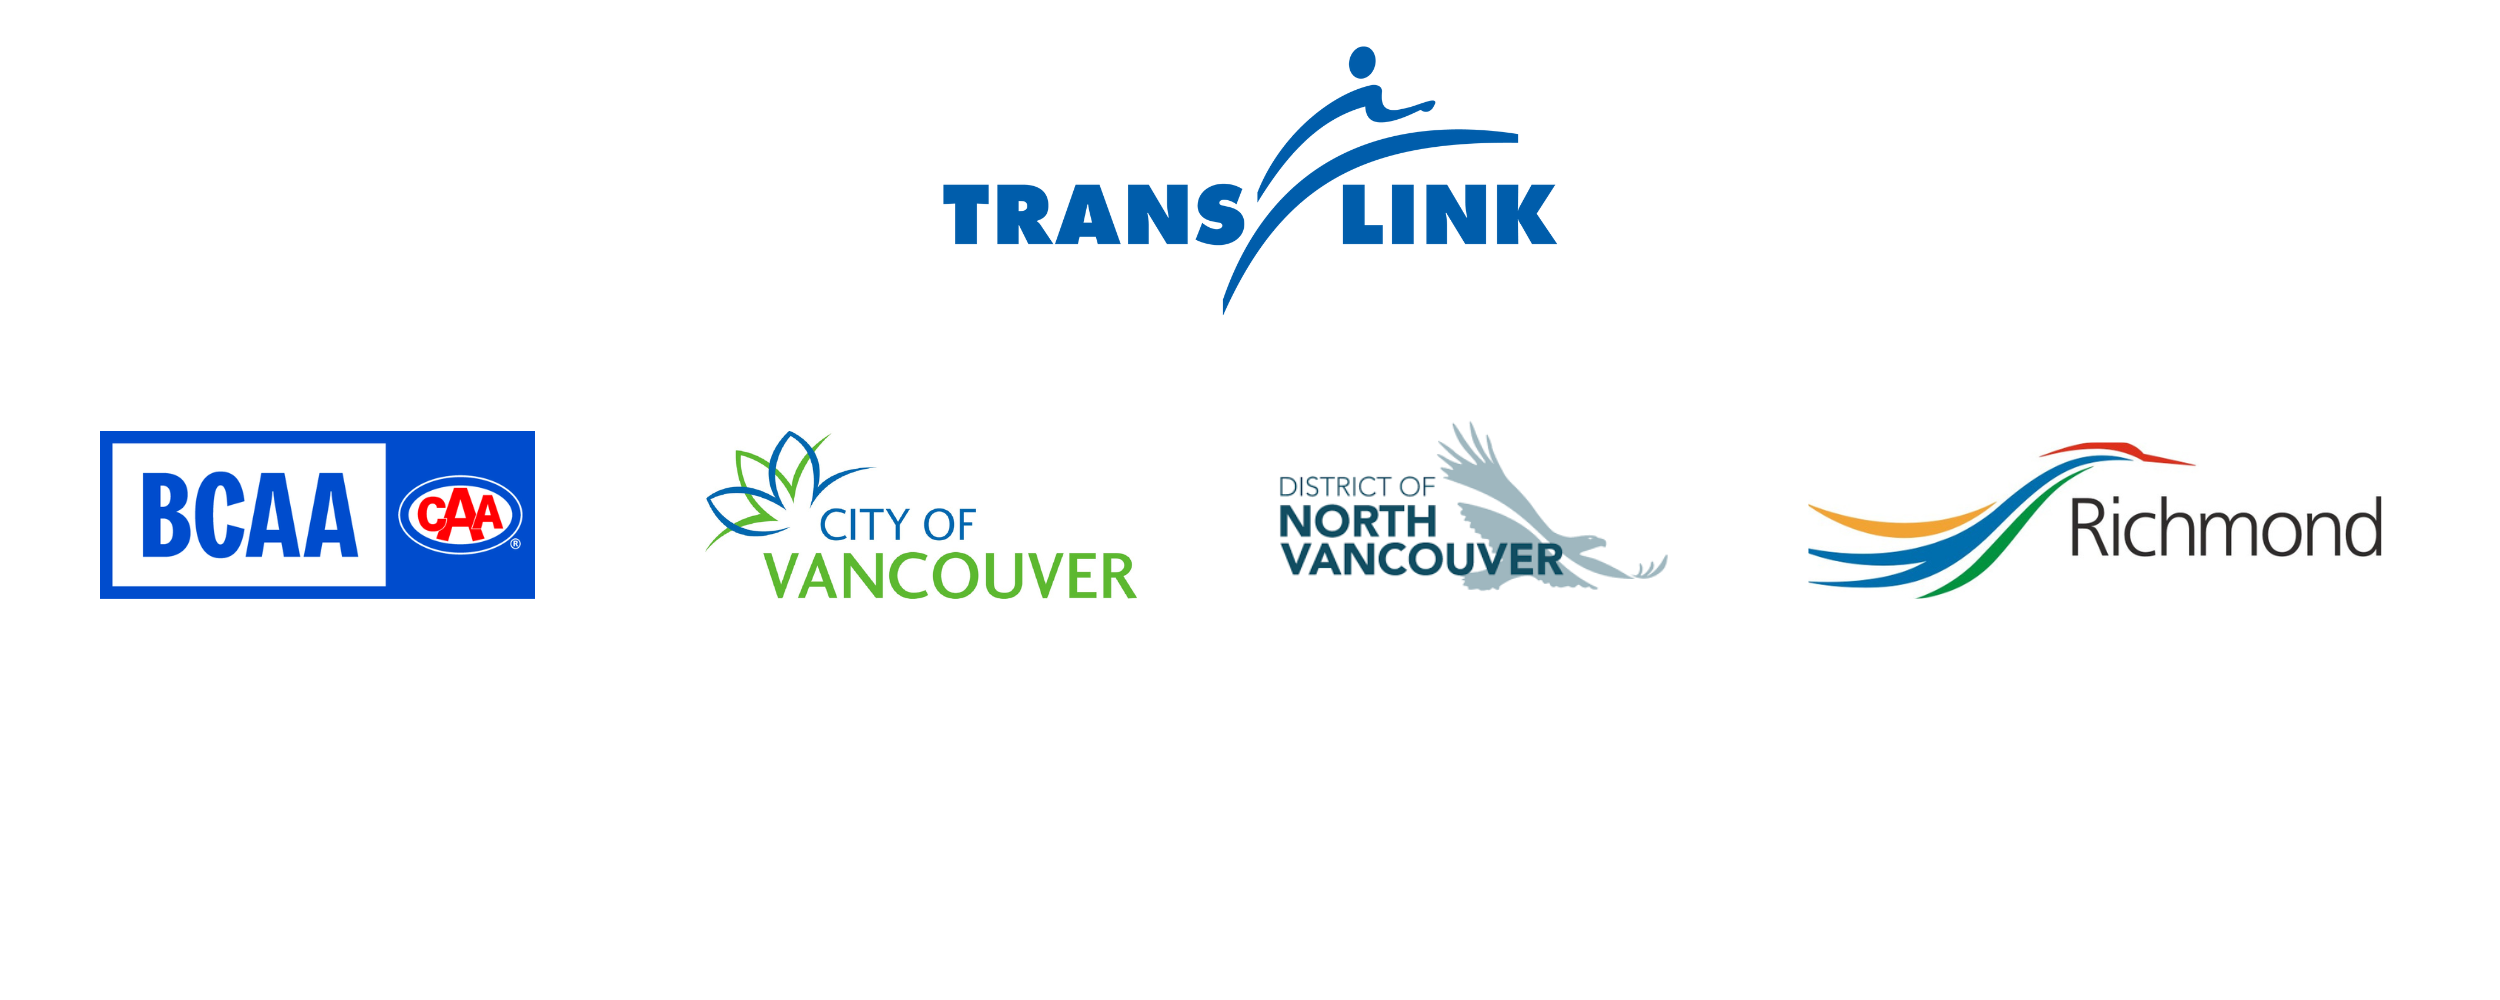 A logo slurry of the program funders. The logos include TransLink, BCAA, City of Vancouver, District of North Vancouver and the City of Richmond.